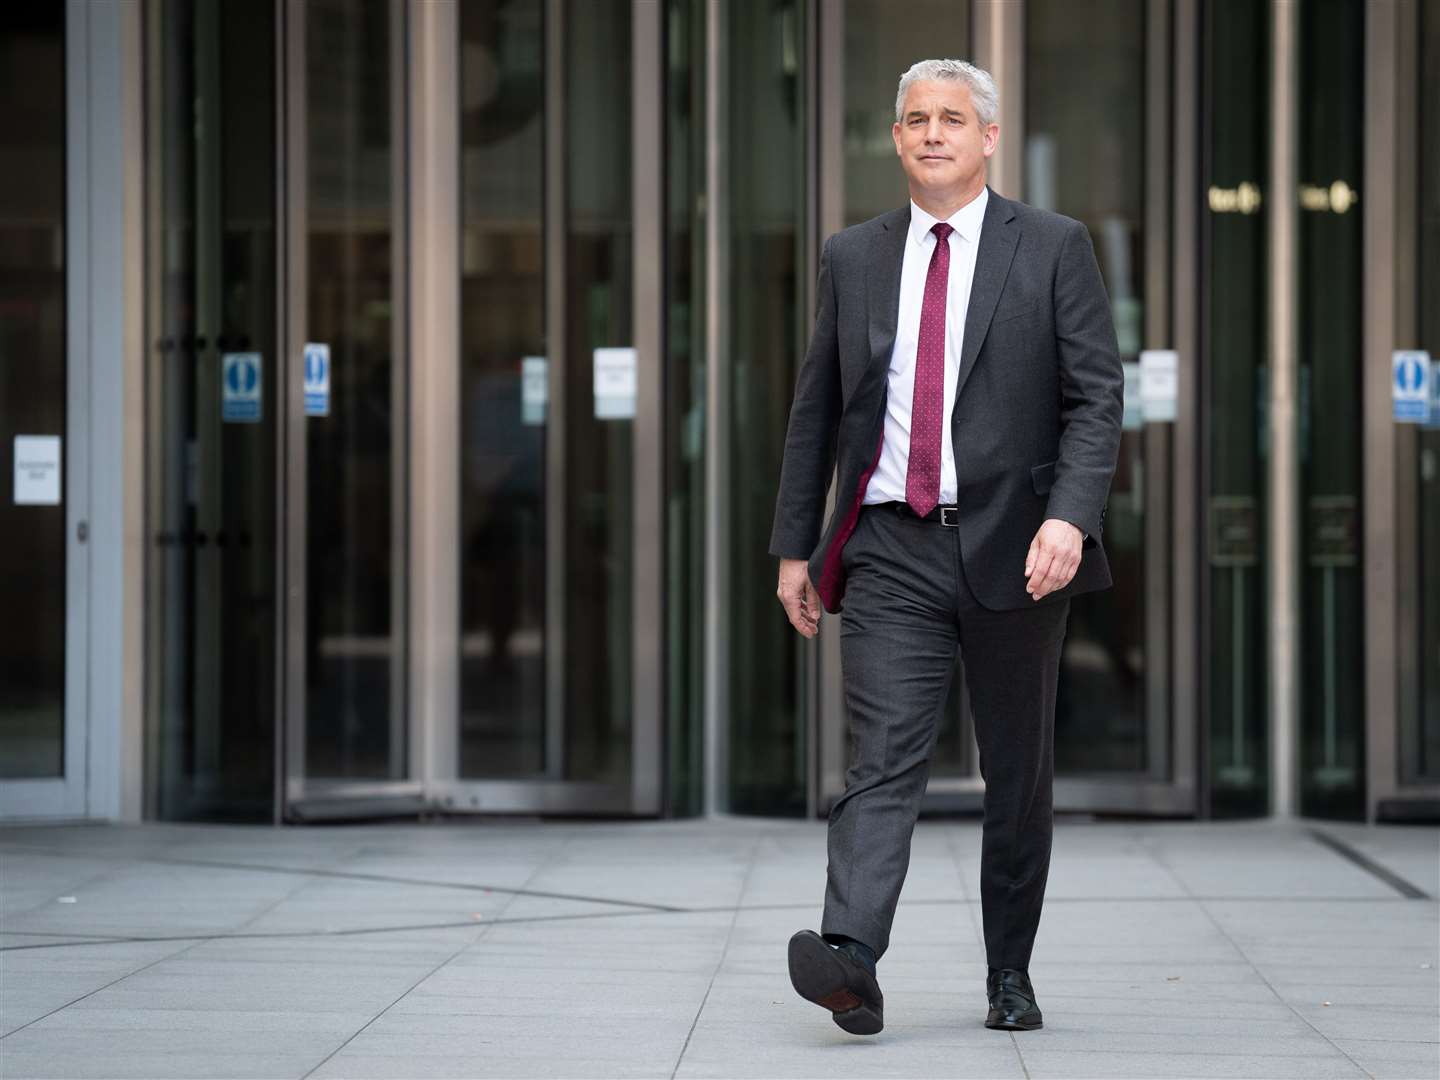 Health Secretary Steve Barclay said the government committed to a long-term workforce plan (James Manning/ PA)